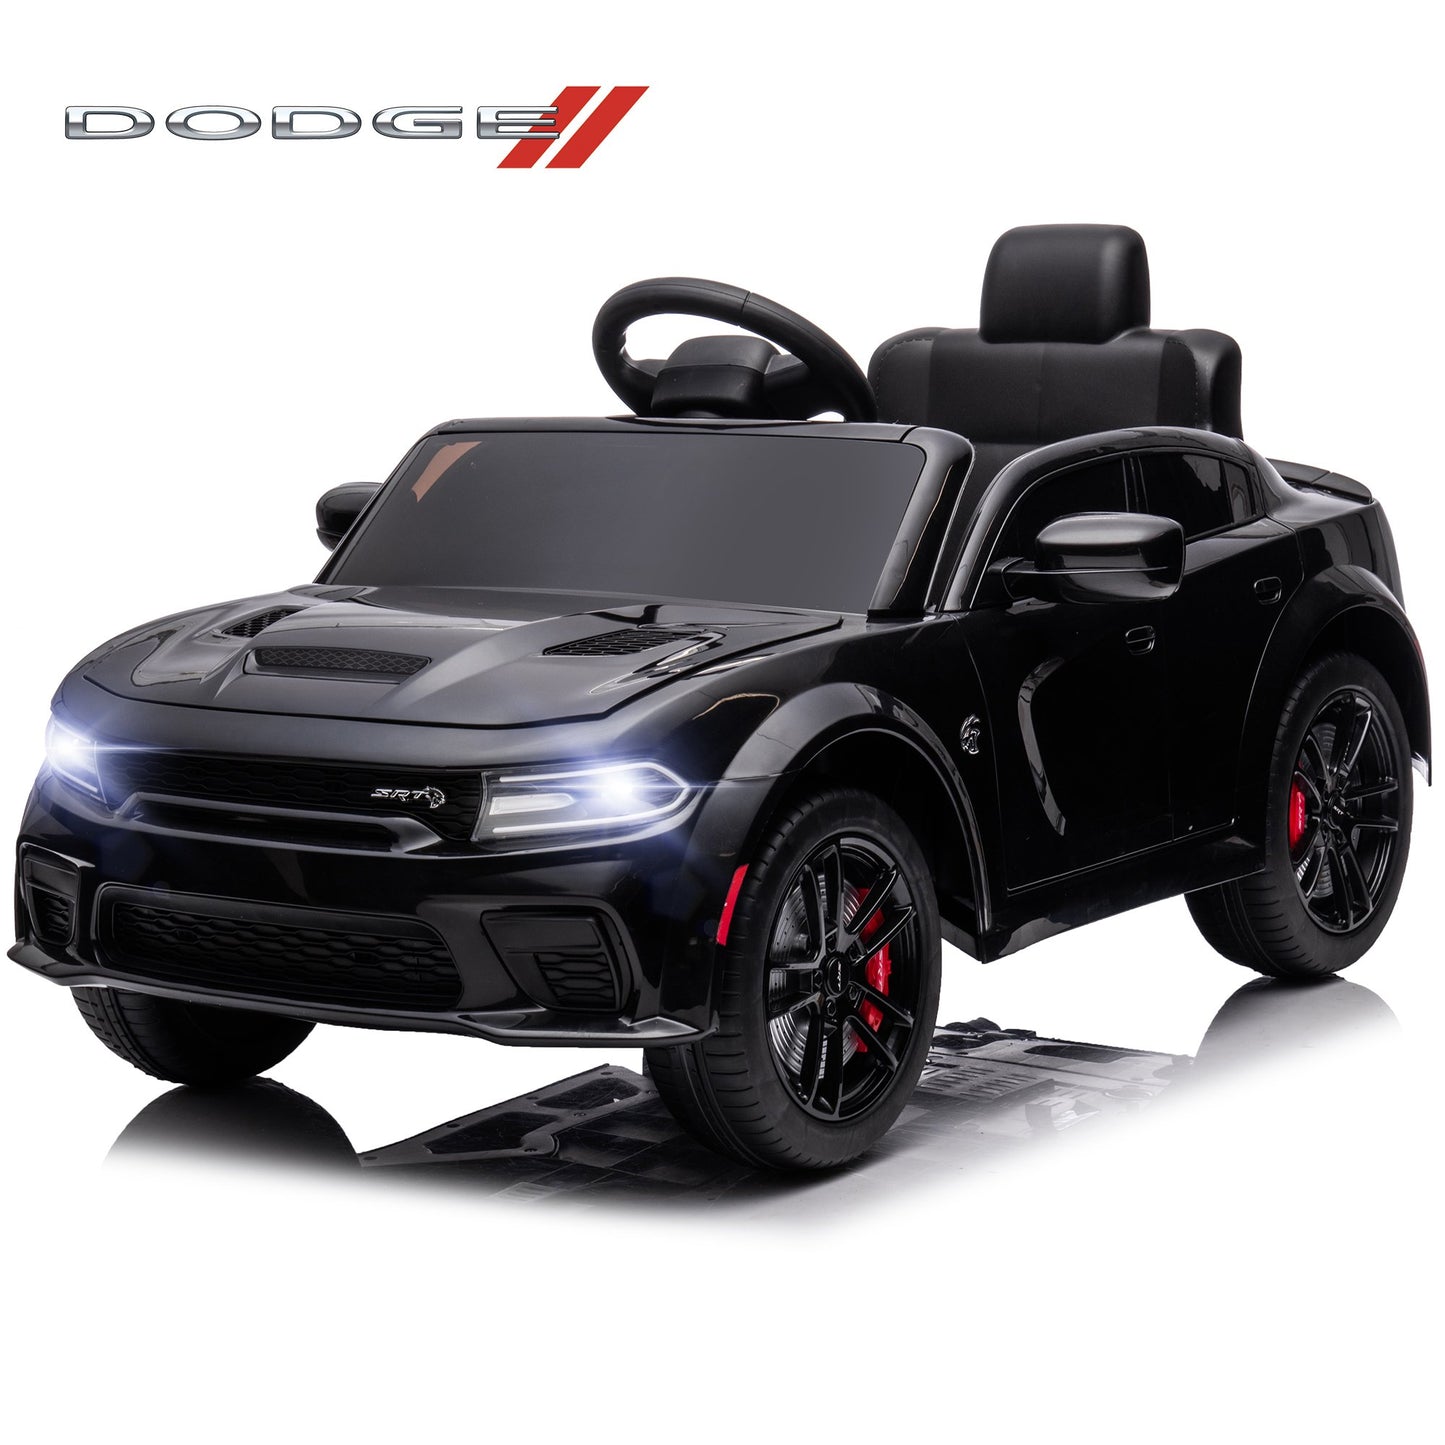 iRerts 12V Dodge Charger SRT Boys Girls Kids Ride on Car Toys, Electric 12V Battery Operated Riding Toys with Remote Control for Christmas Birthday Gift